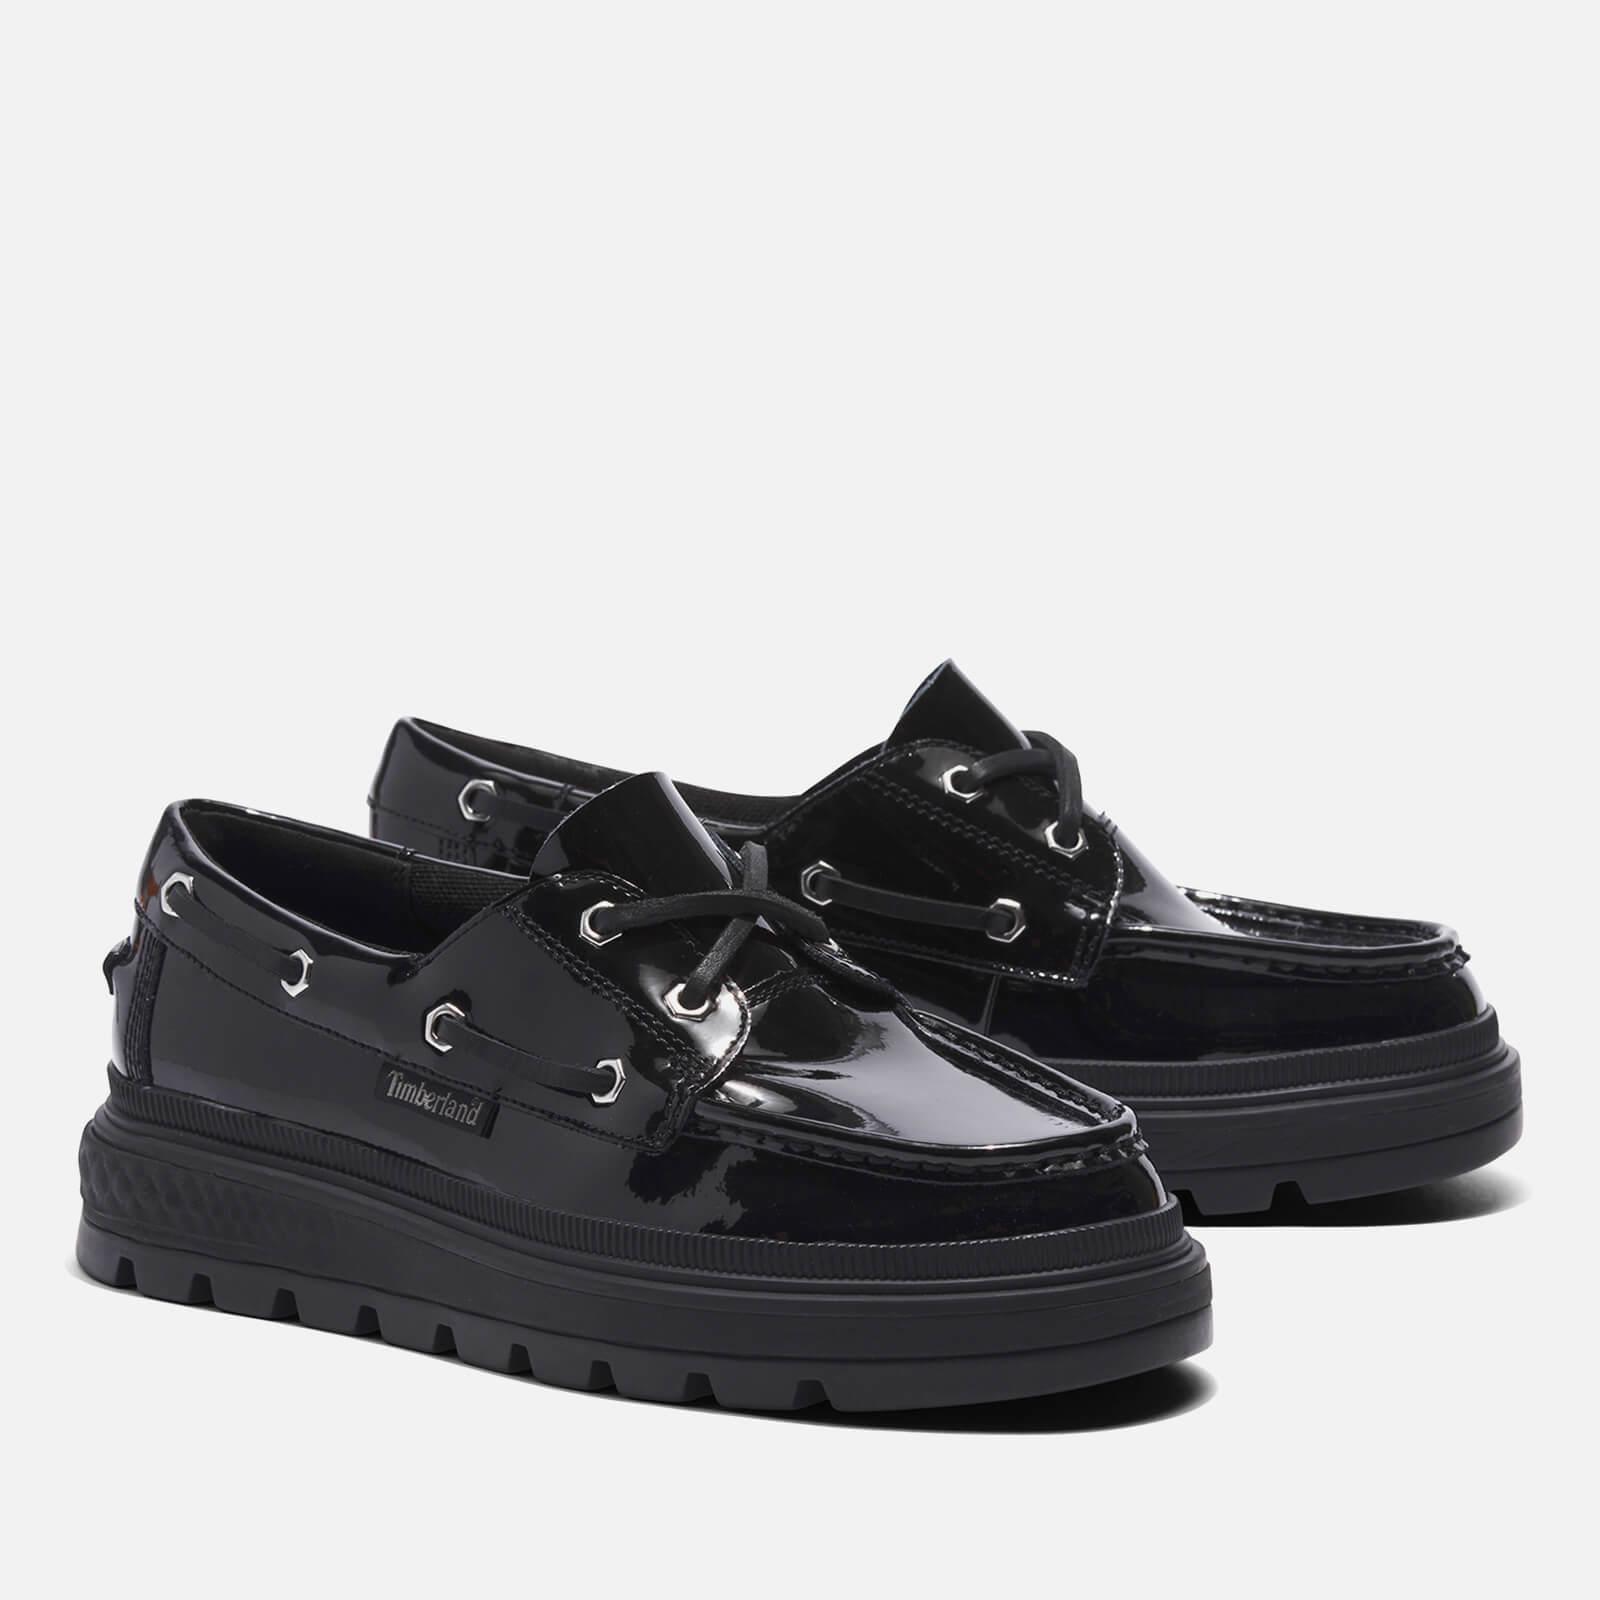 Caius Tilbageholde Rettsmedicin Timberland Ray City Patent Leather Boat Shoes in Black | Lyst